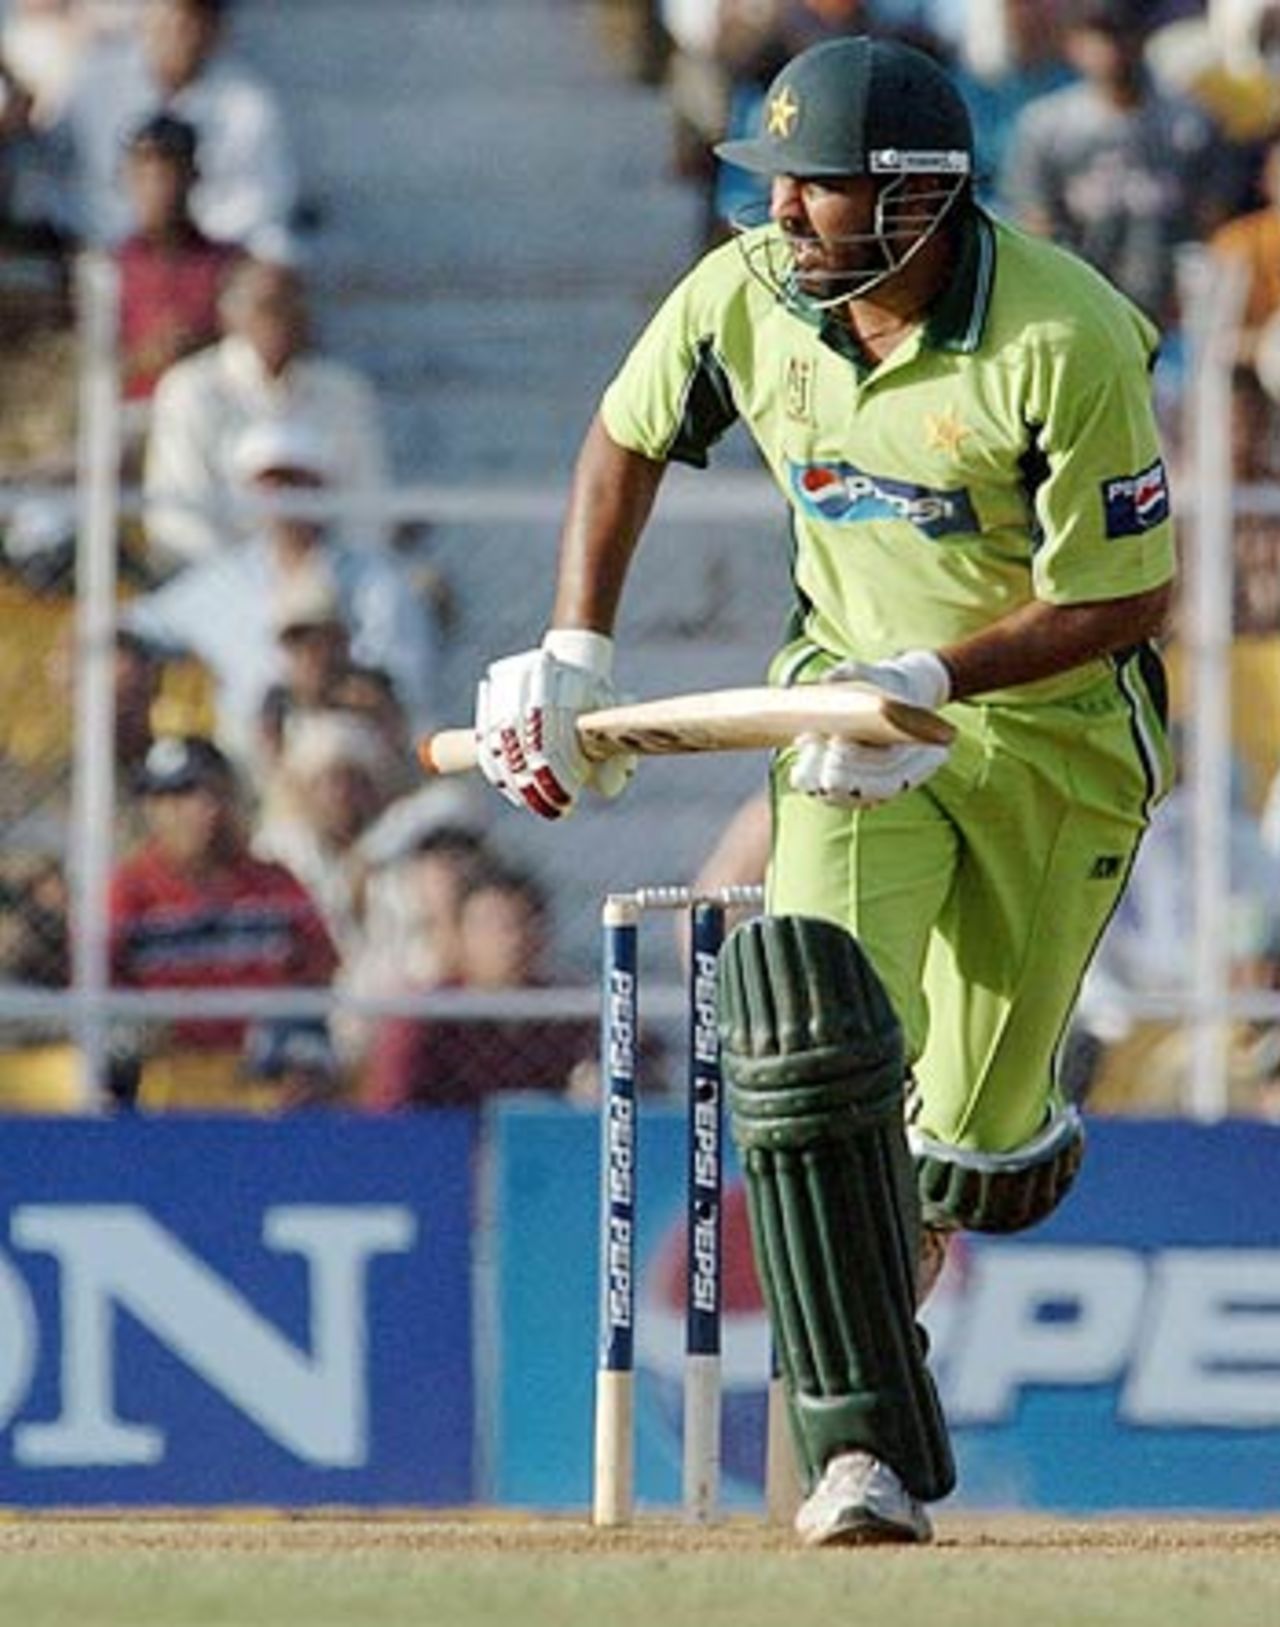 Inzamam-ul-Haq's shrewd rotation of the strike proved decisive in the end, India v Pakistan, 4th ODI, Ahmedabad, April 12, 2005